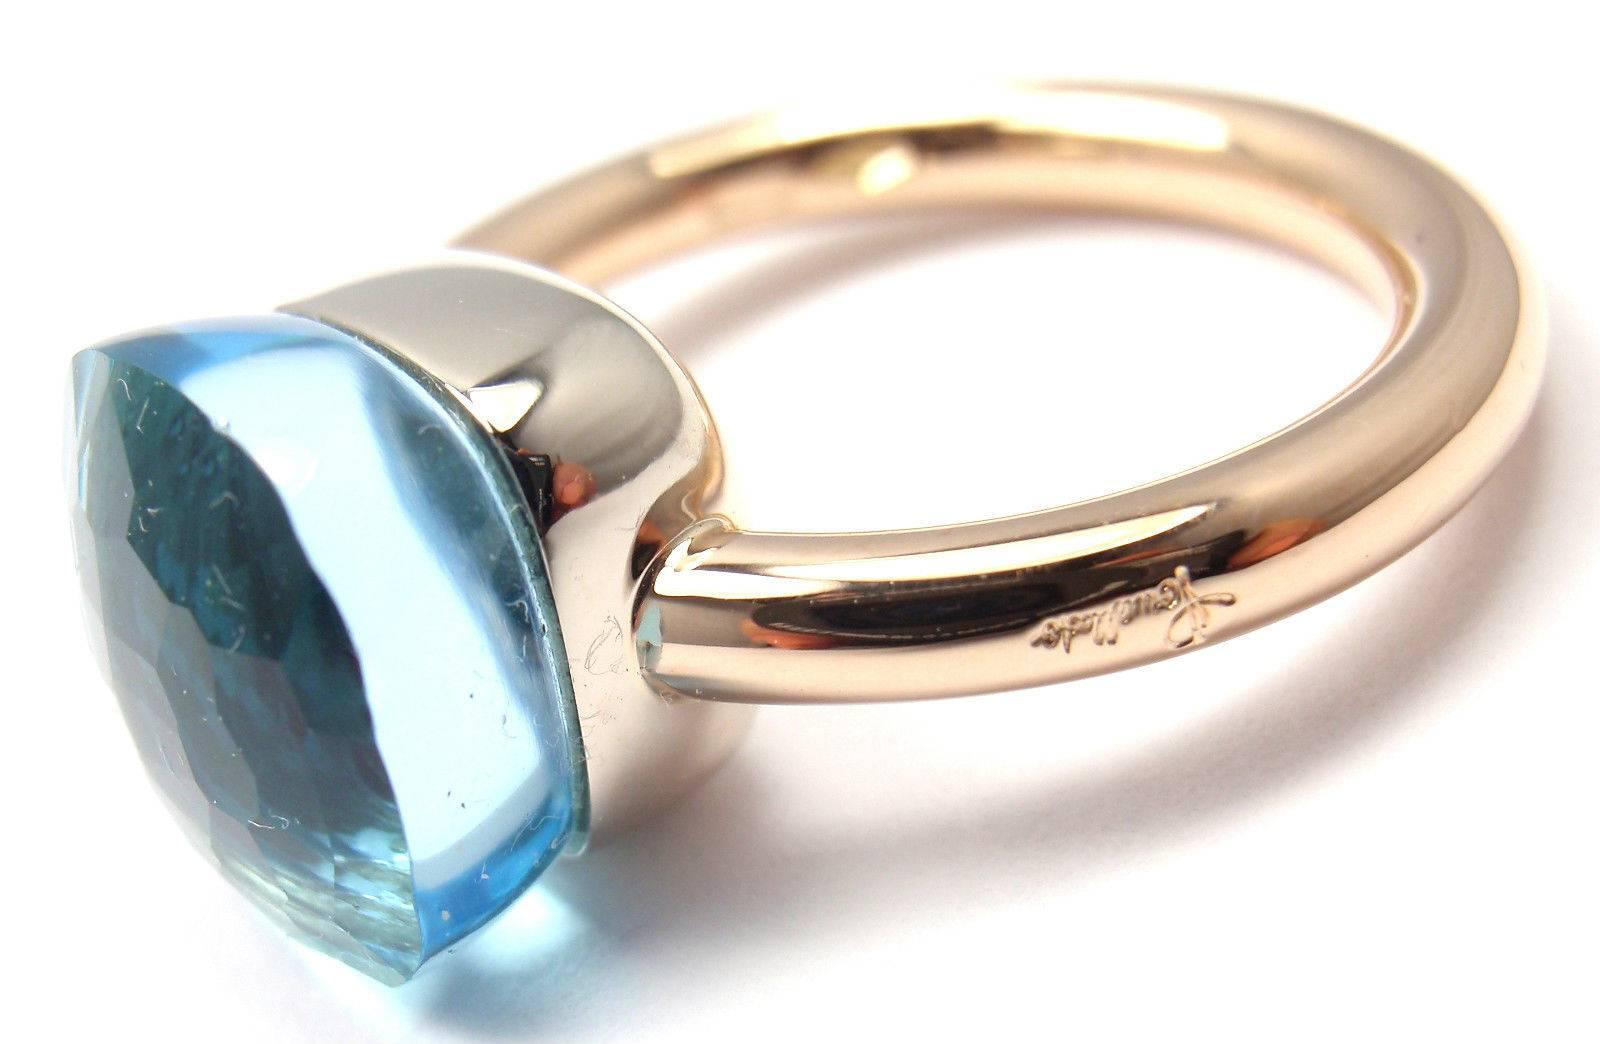 18k Rose And White Gold Nudo Blue Topaz Ring by Pomellato. 
This ring comes with an original Pomellato box and a certificate. 
With 1 blue topaz 11mm x 11mm

Details:
Size: 5
Width: 11mm
Weight: 7.9 grams
Stamped Hallmarks: Pomellato 750